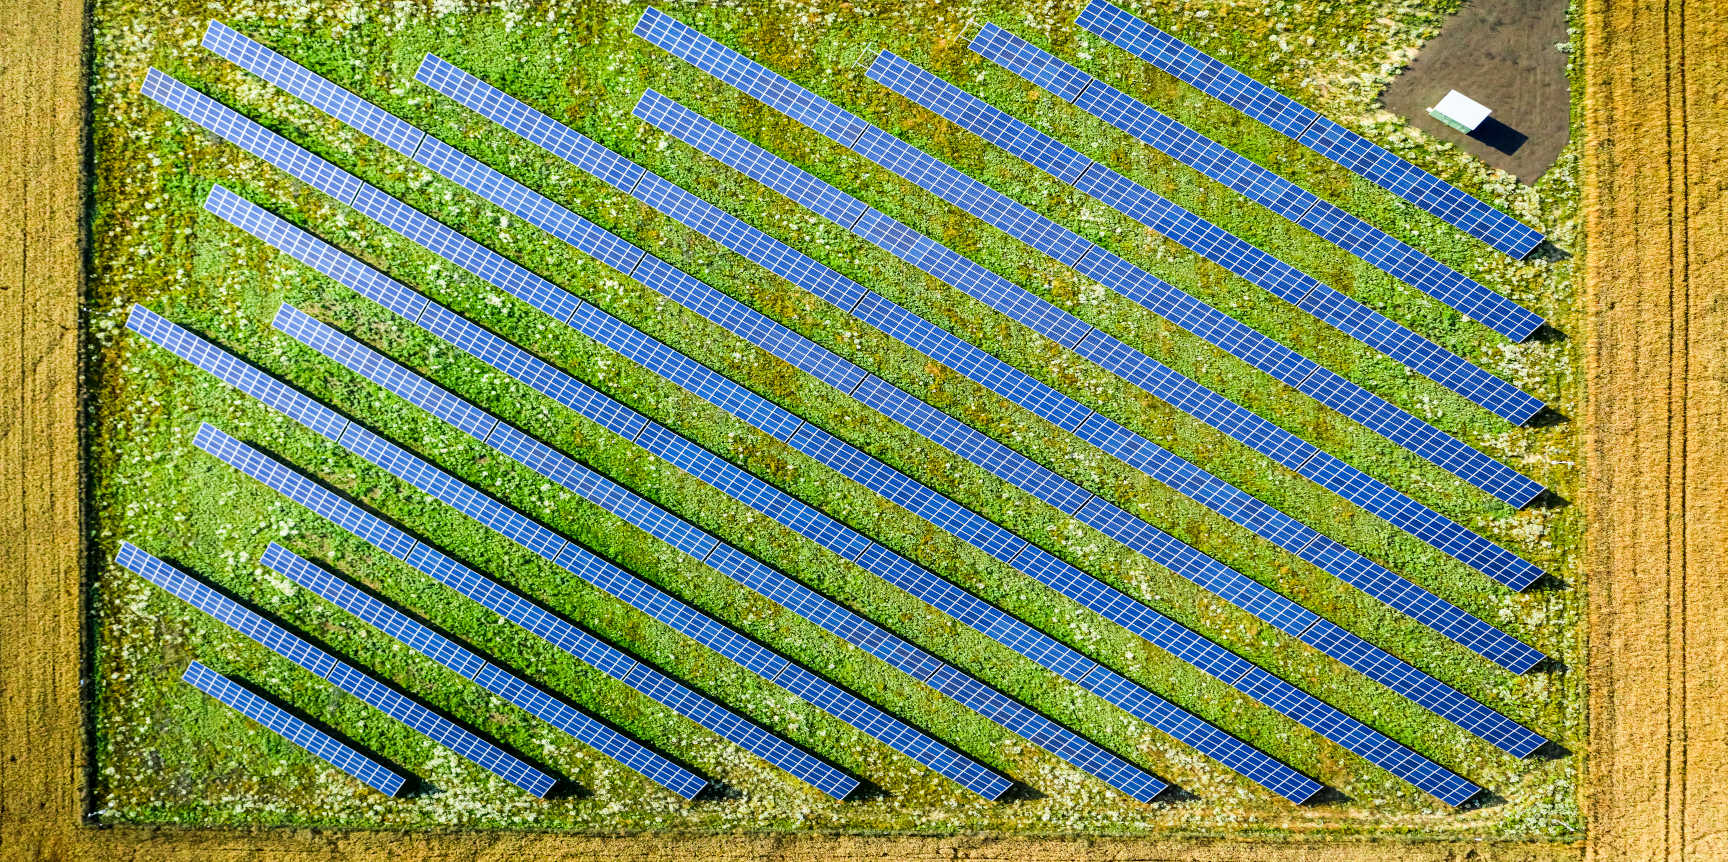 Enlarged view: Solar plant